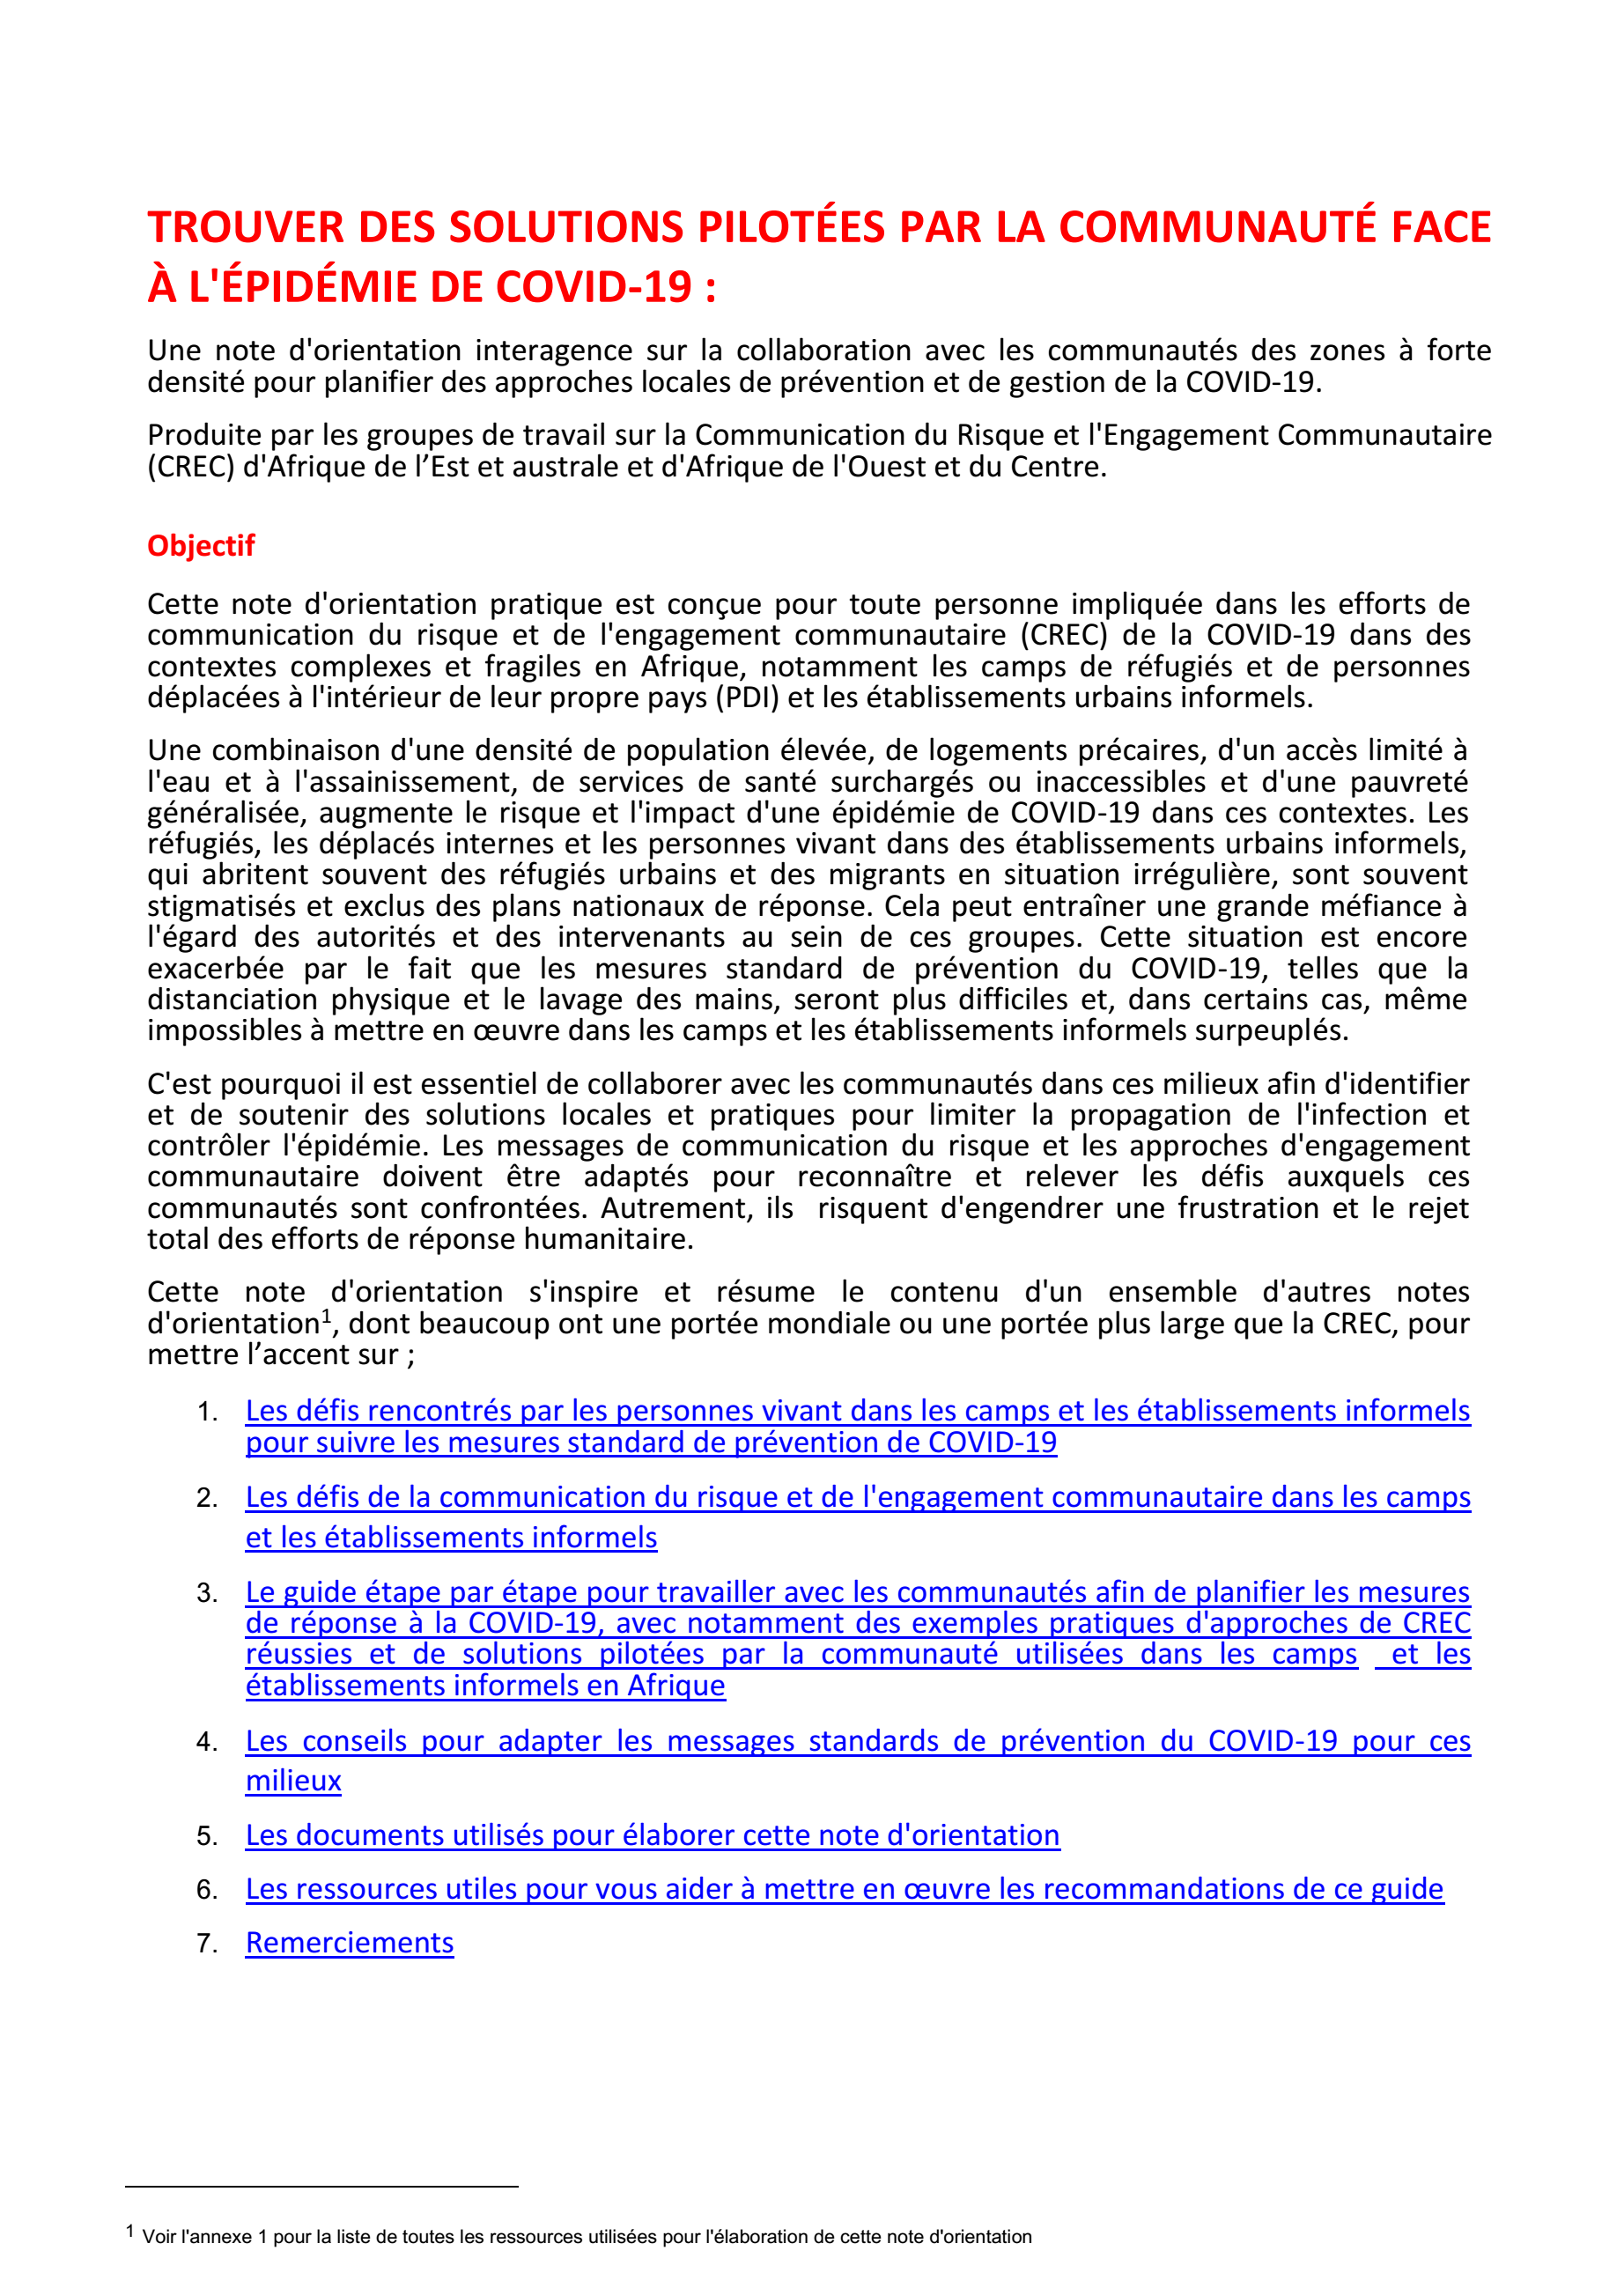 Community_Led_Solutions_COVID-19_Africa_Interagency_Guidance Note_FRA